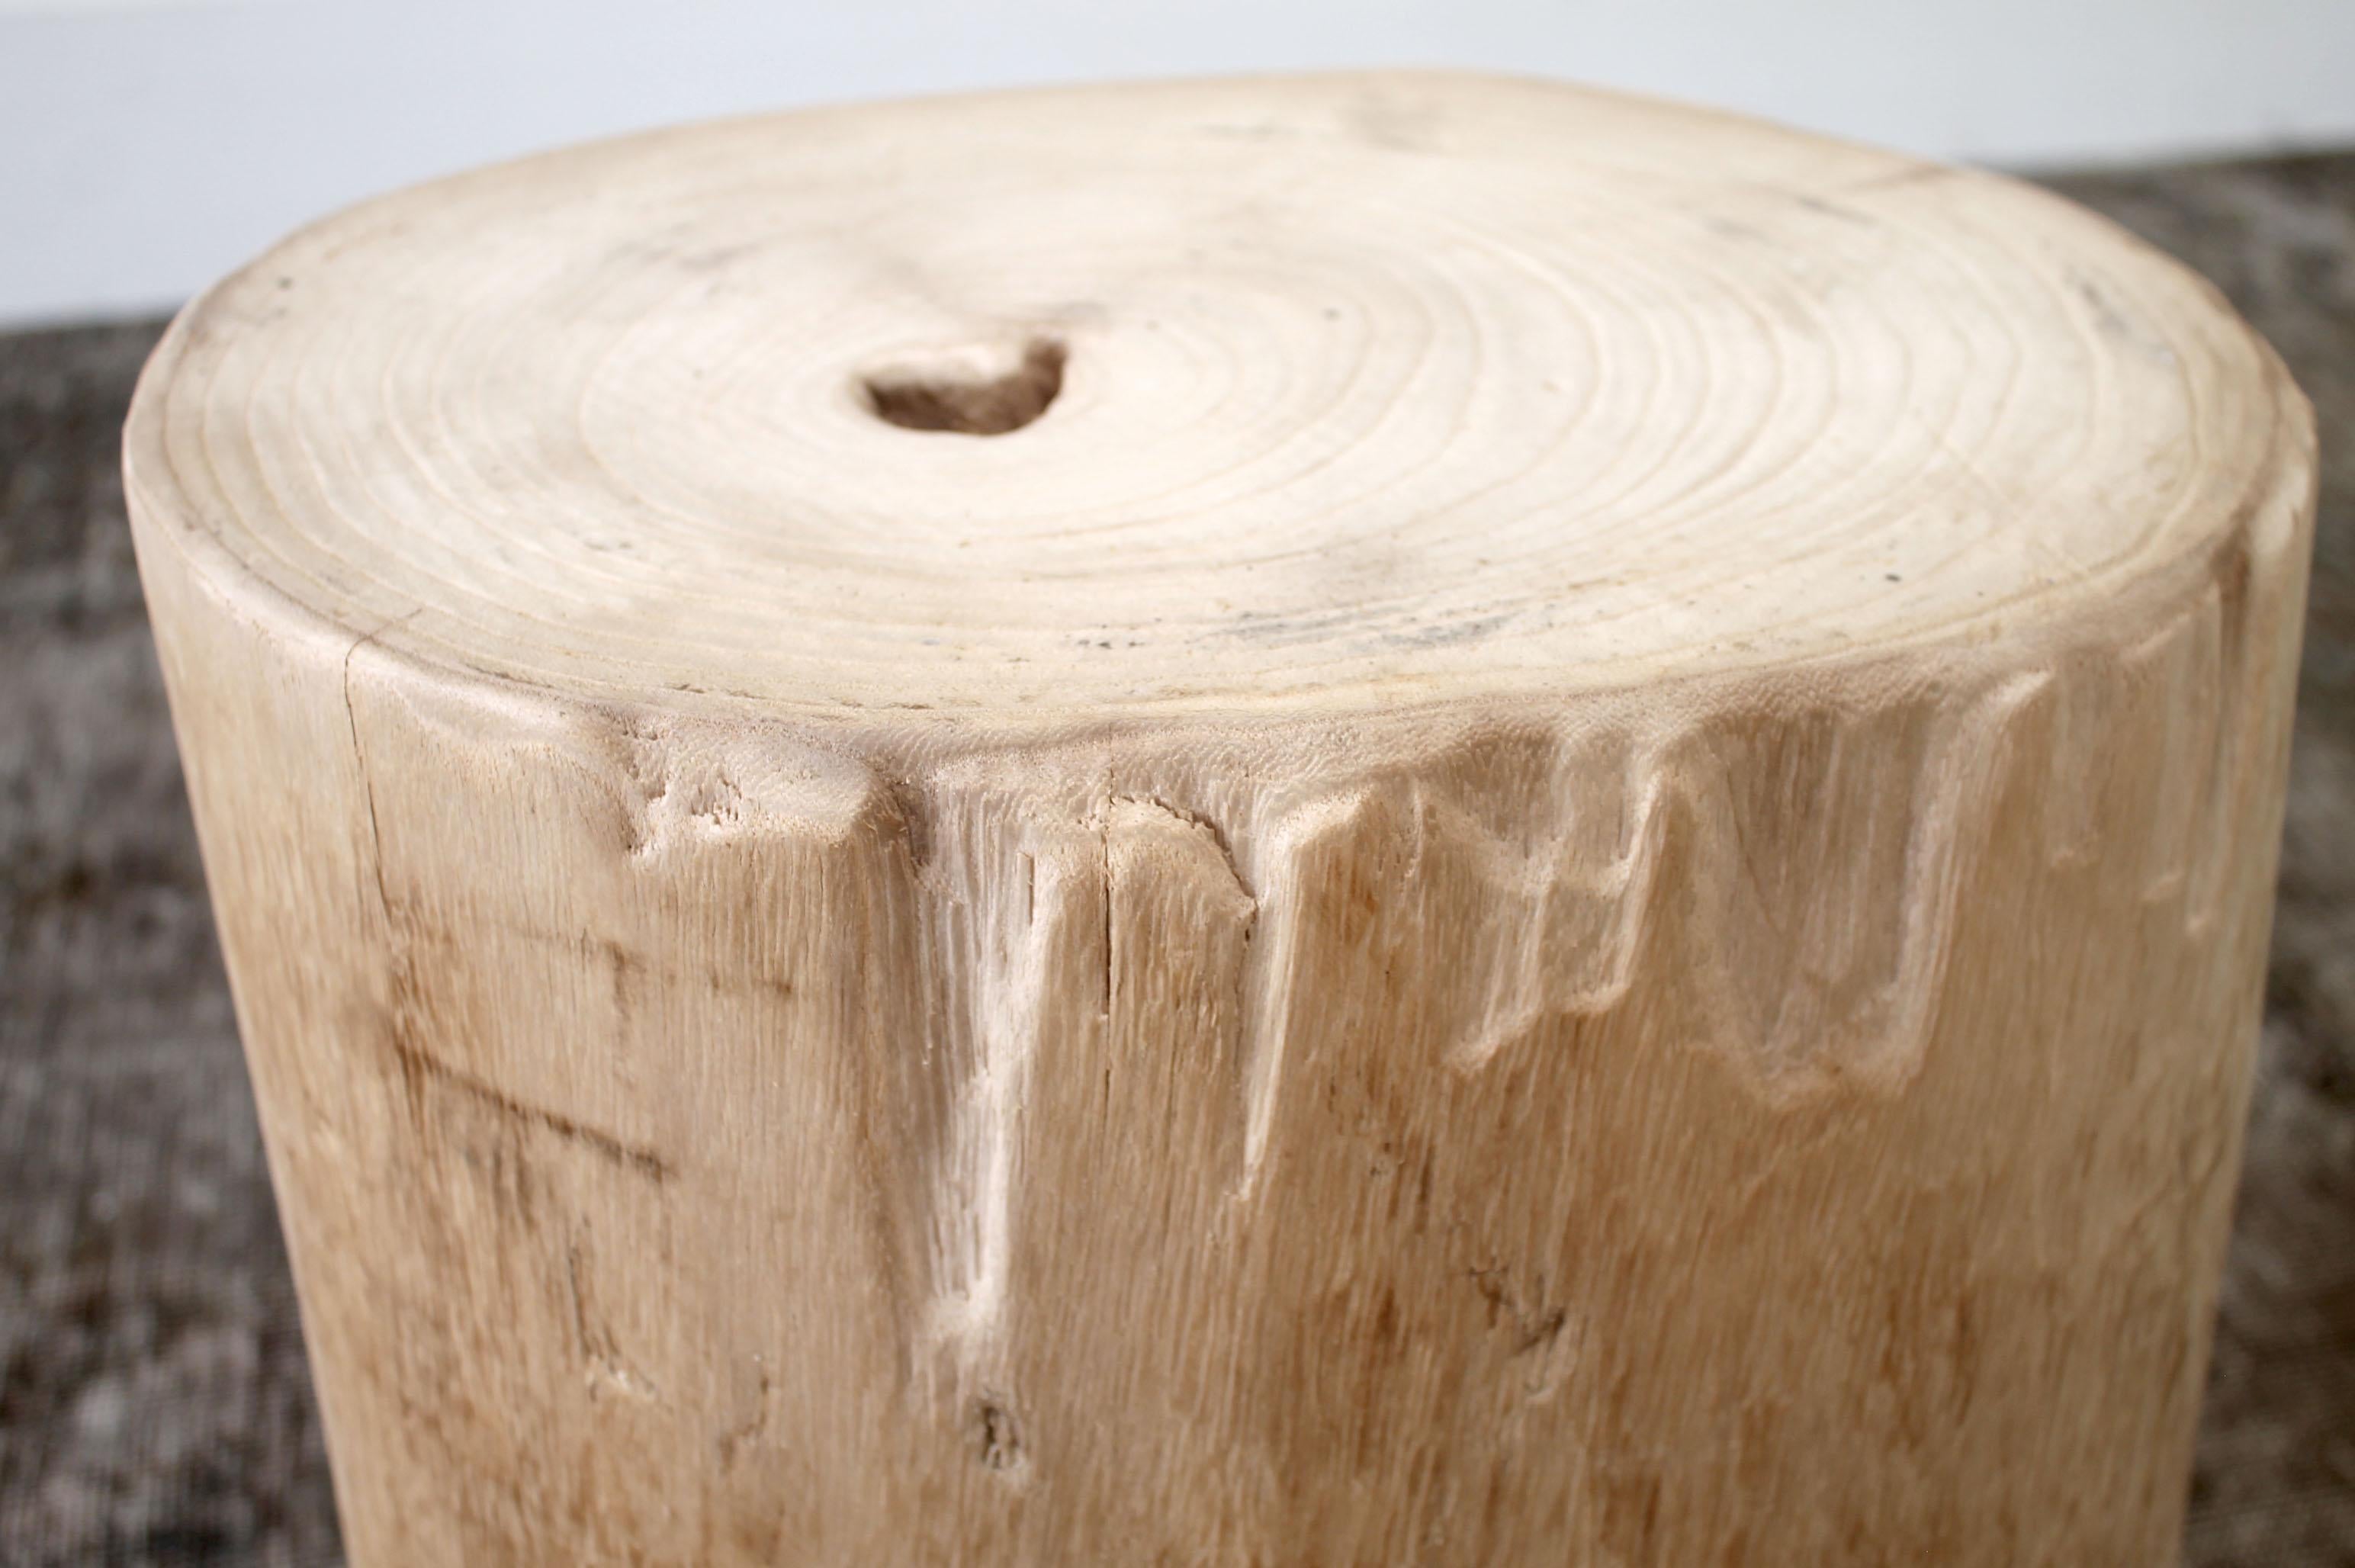 Contemporary Birch Wood Tree Stump Base for Side Table or Stool